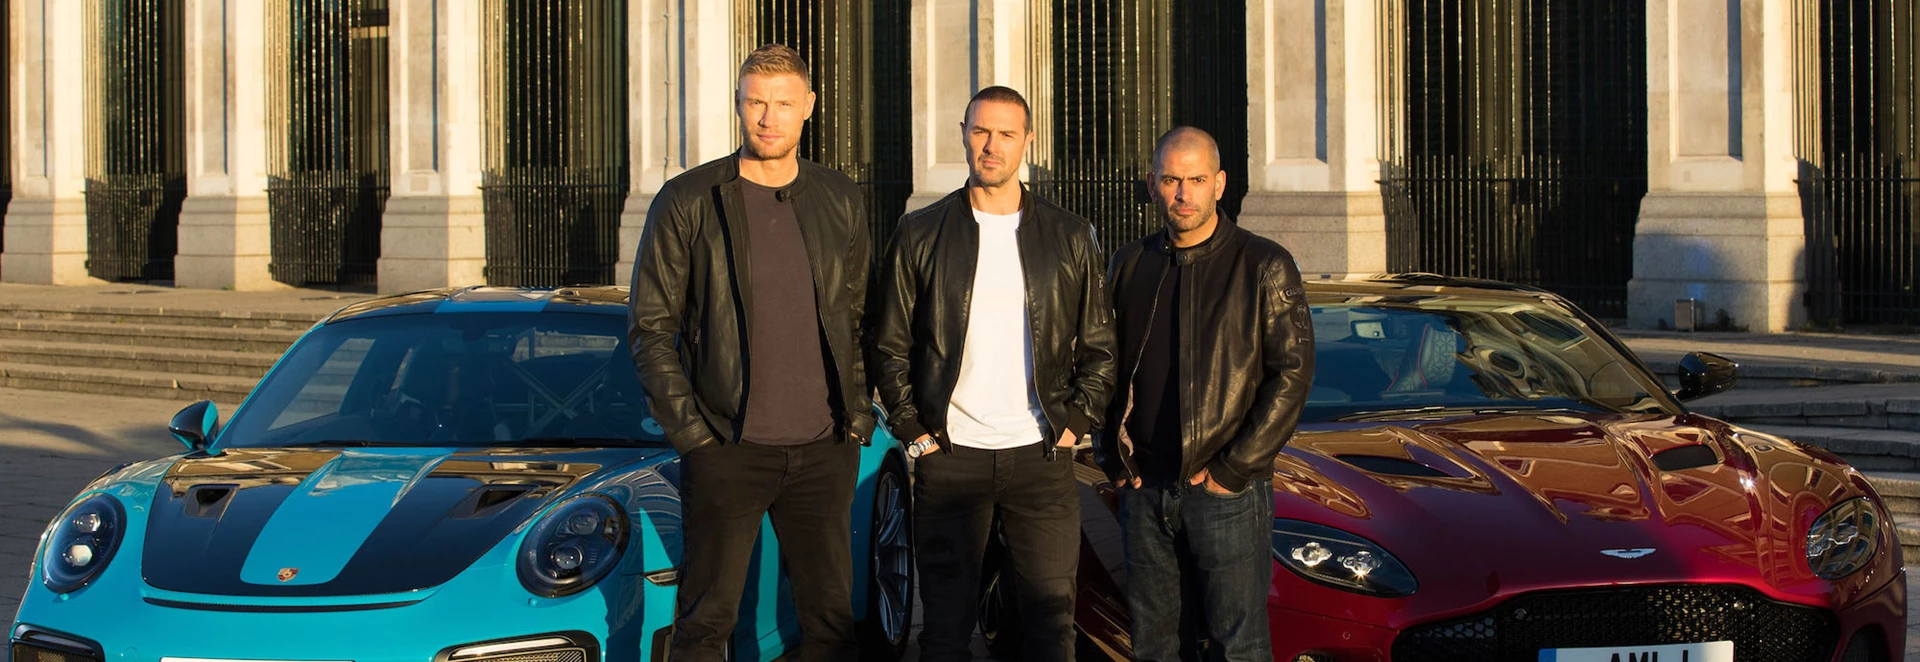 Top Gear reveals Flintoff and McGuiness as new presenters